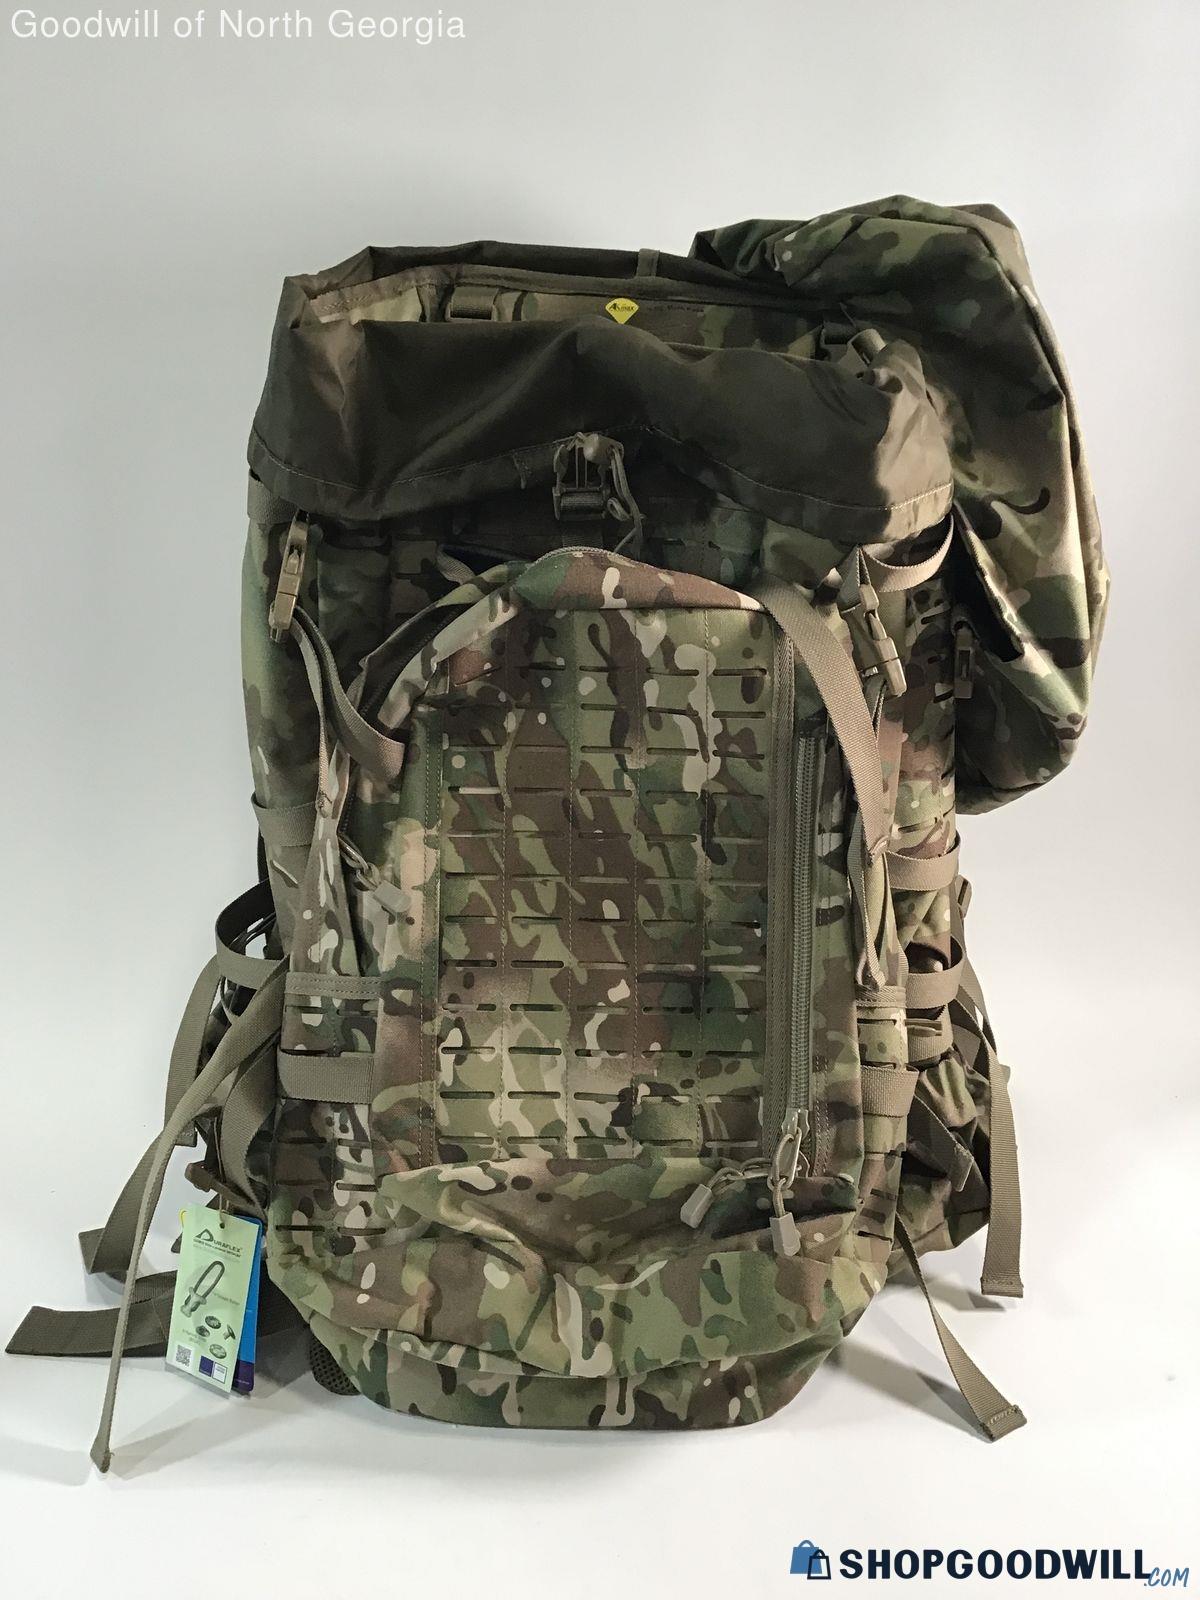 Akmax Military ILBE Tactical Assault Hydration Camping Hiking Rucksack ...